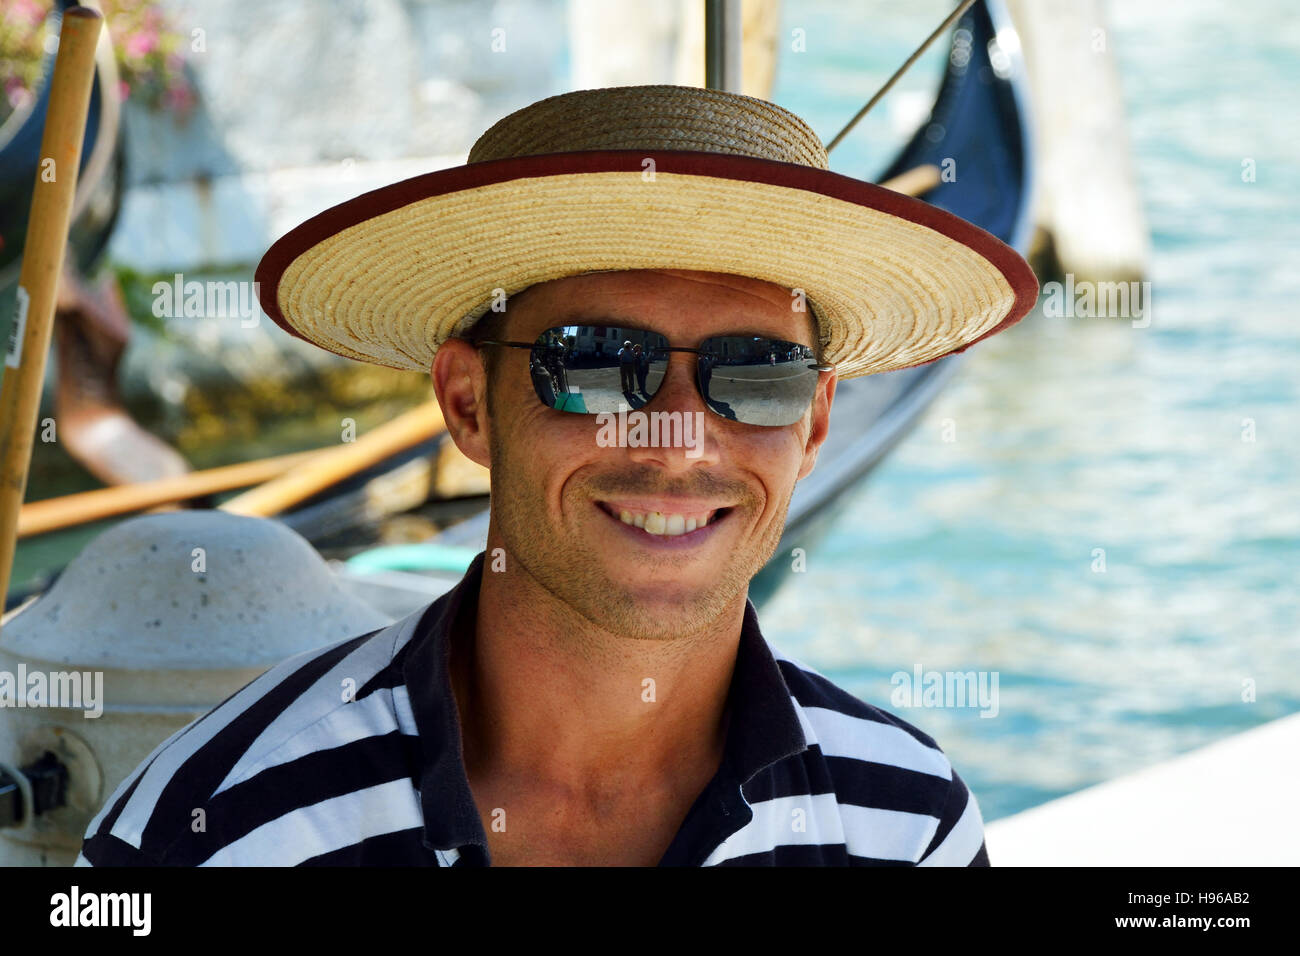 Gondolier with the typical headgear on a canal of Venice in Italy. Stock Photo